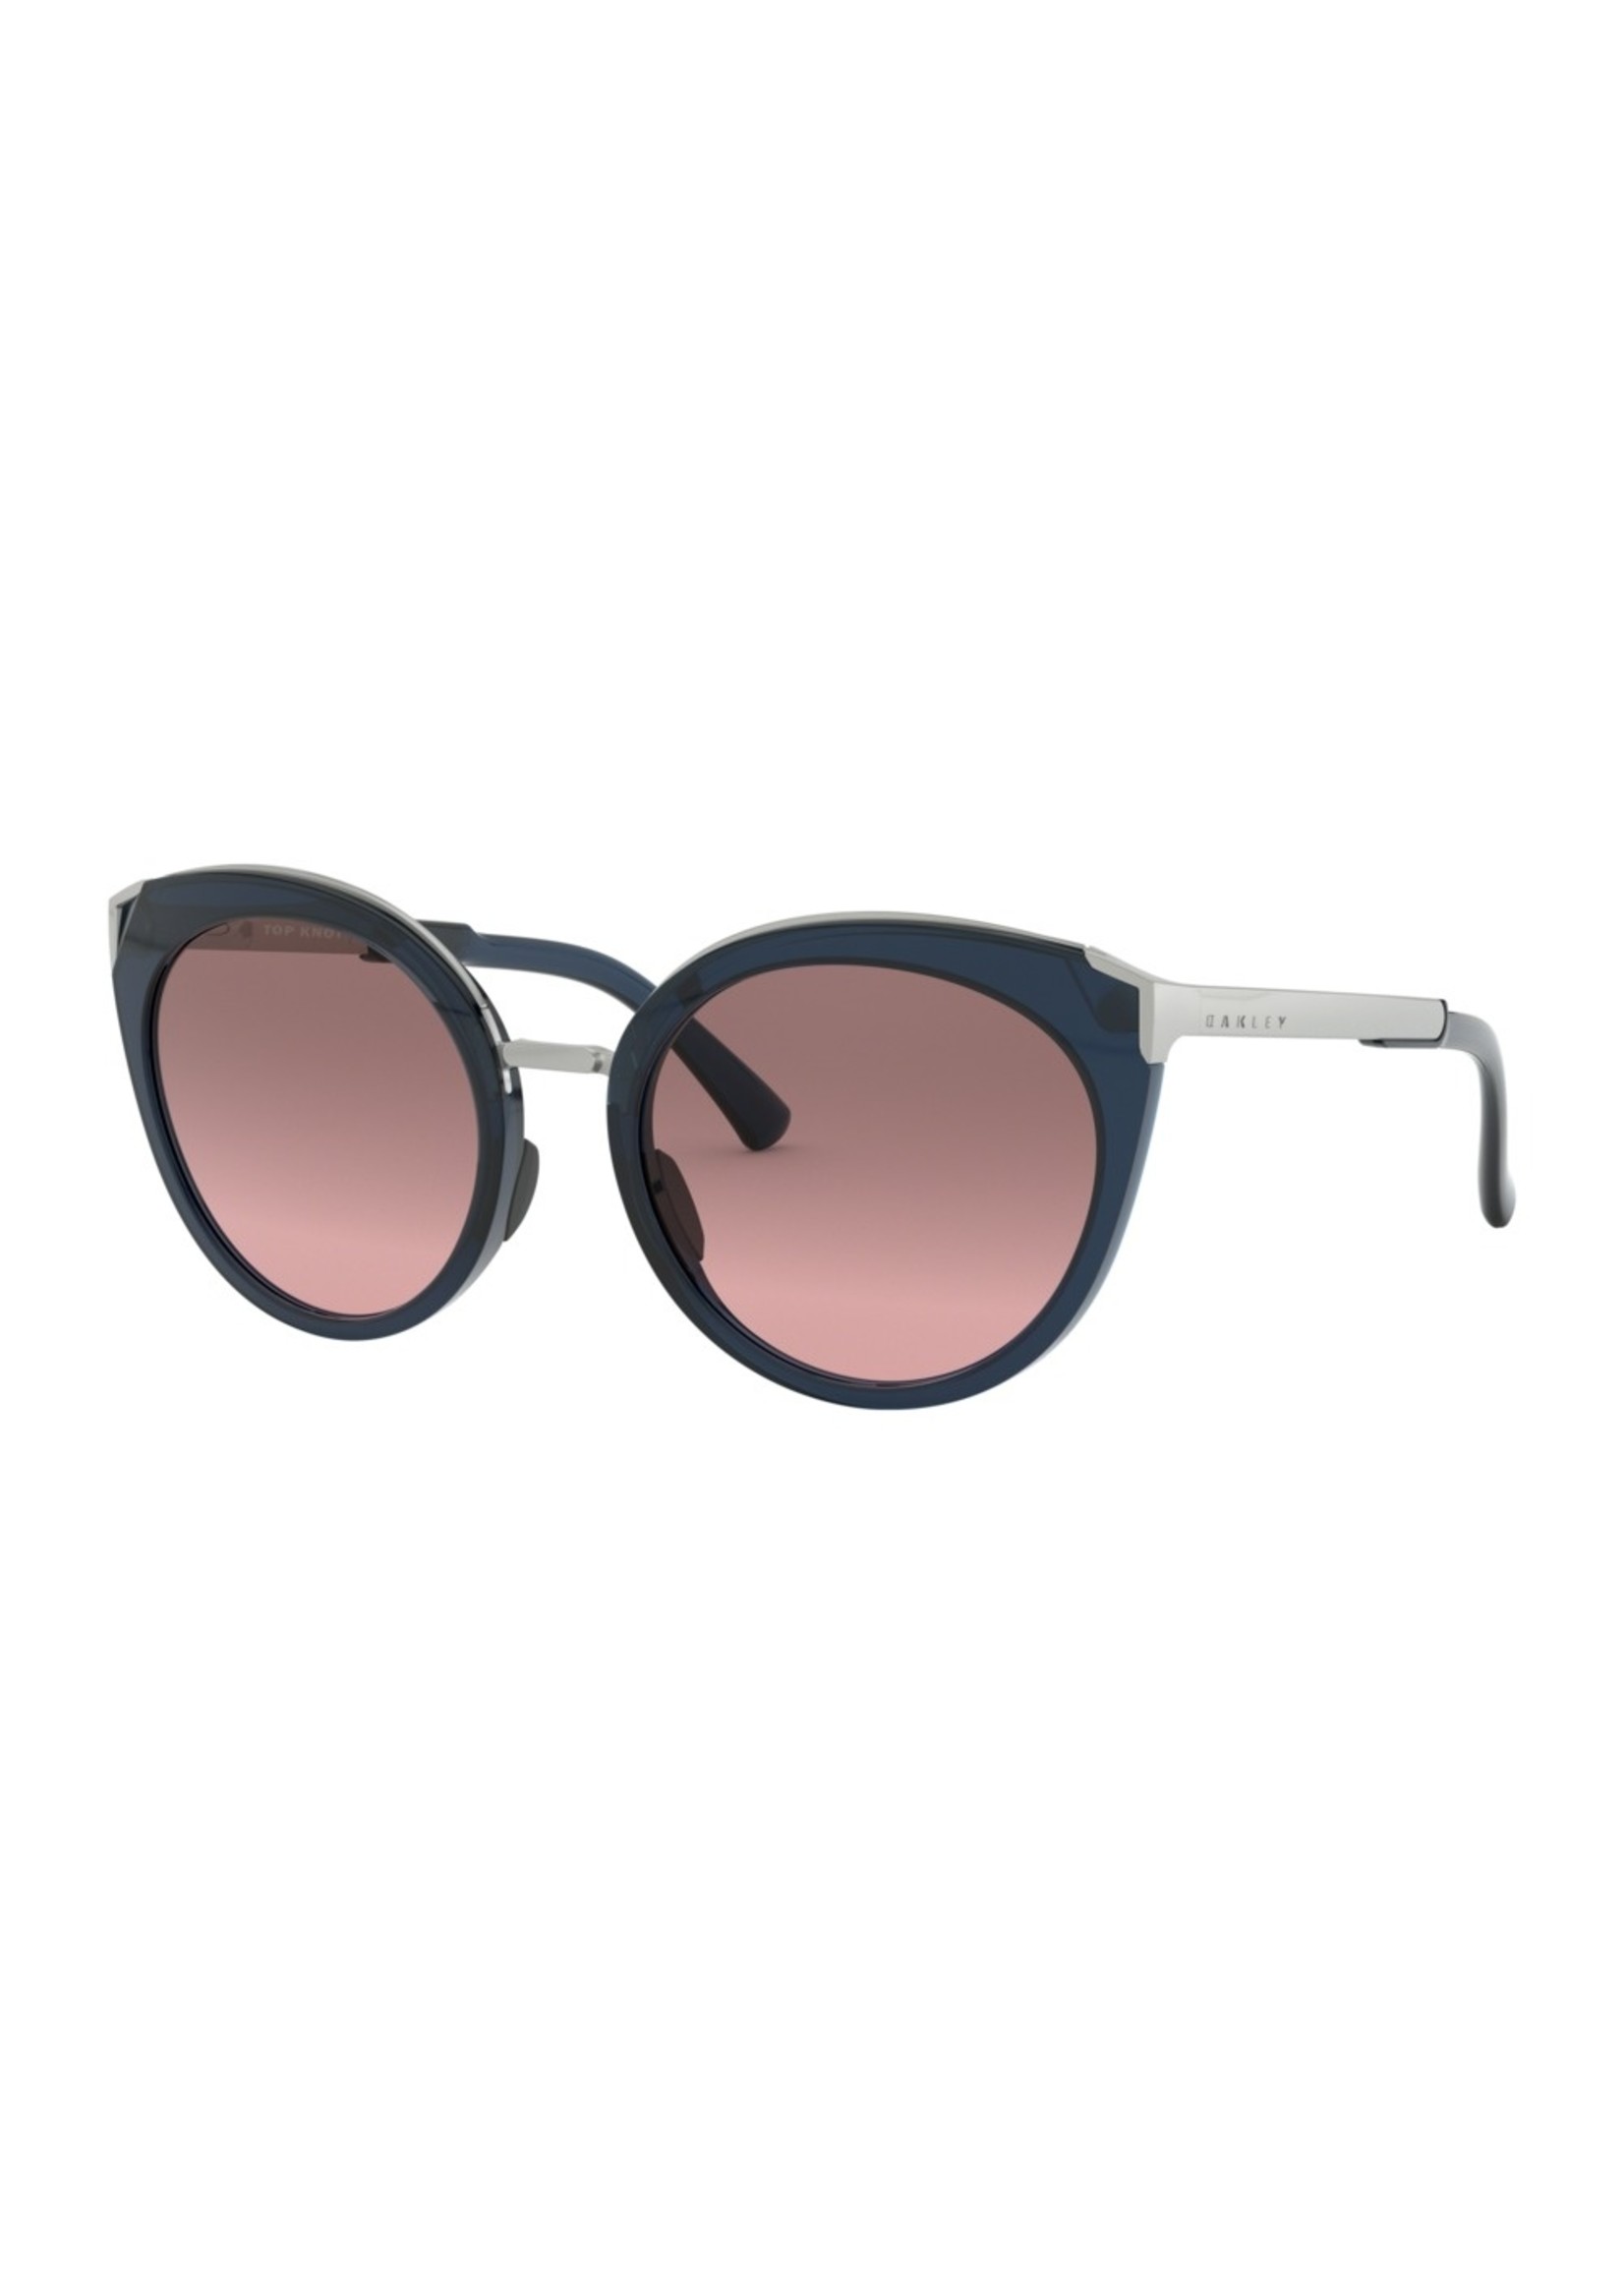 Top Knot™ Midnight Sunglasses w/ G40 Black Gradient Lens - Medicine Hat-The  Boarding House